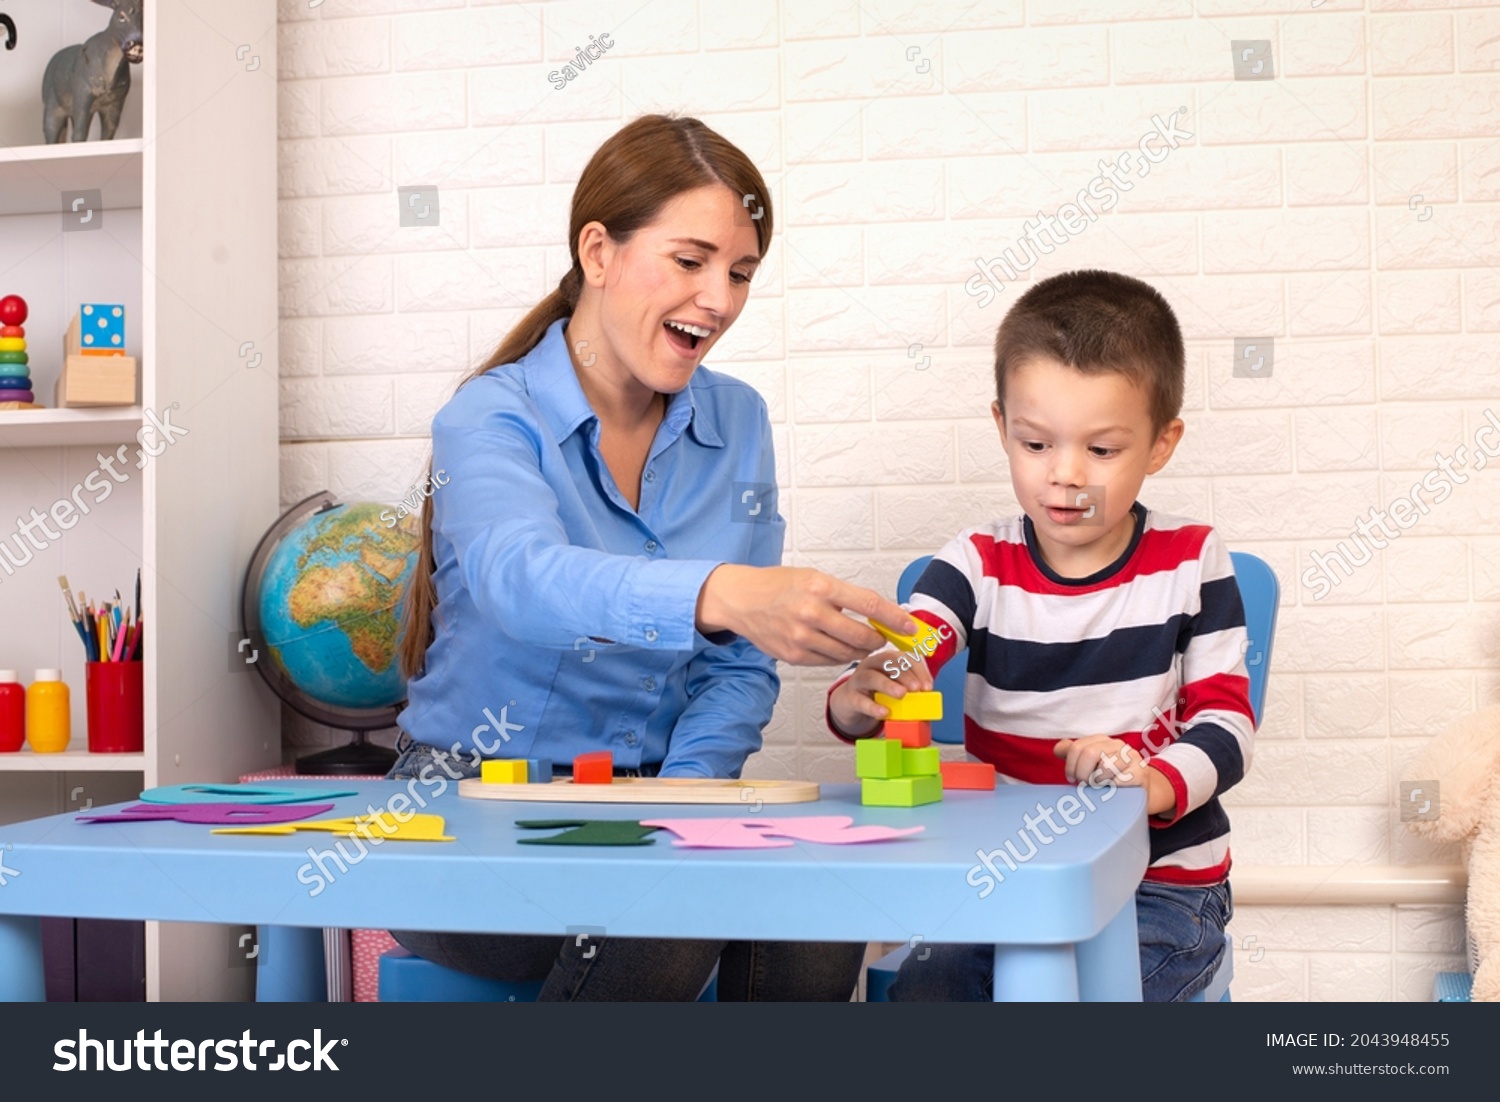 Toddler boy in child occupational therapy session doing sensory playful exercises with her therapist. #2043948455